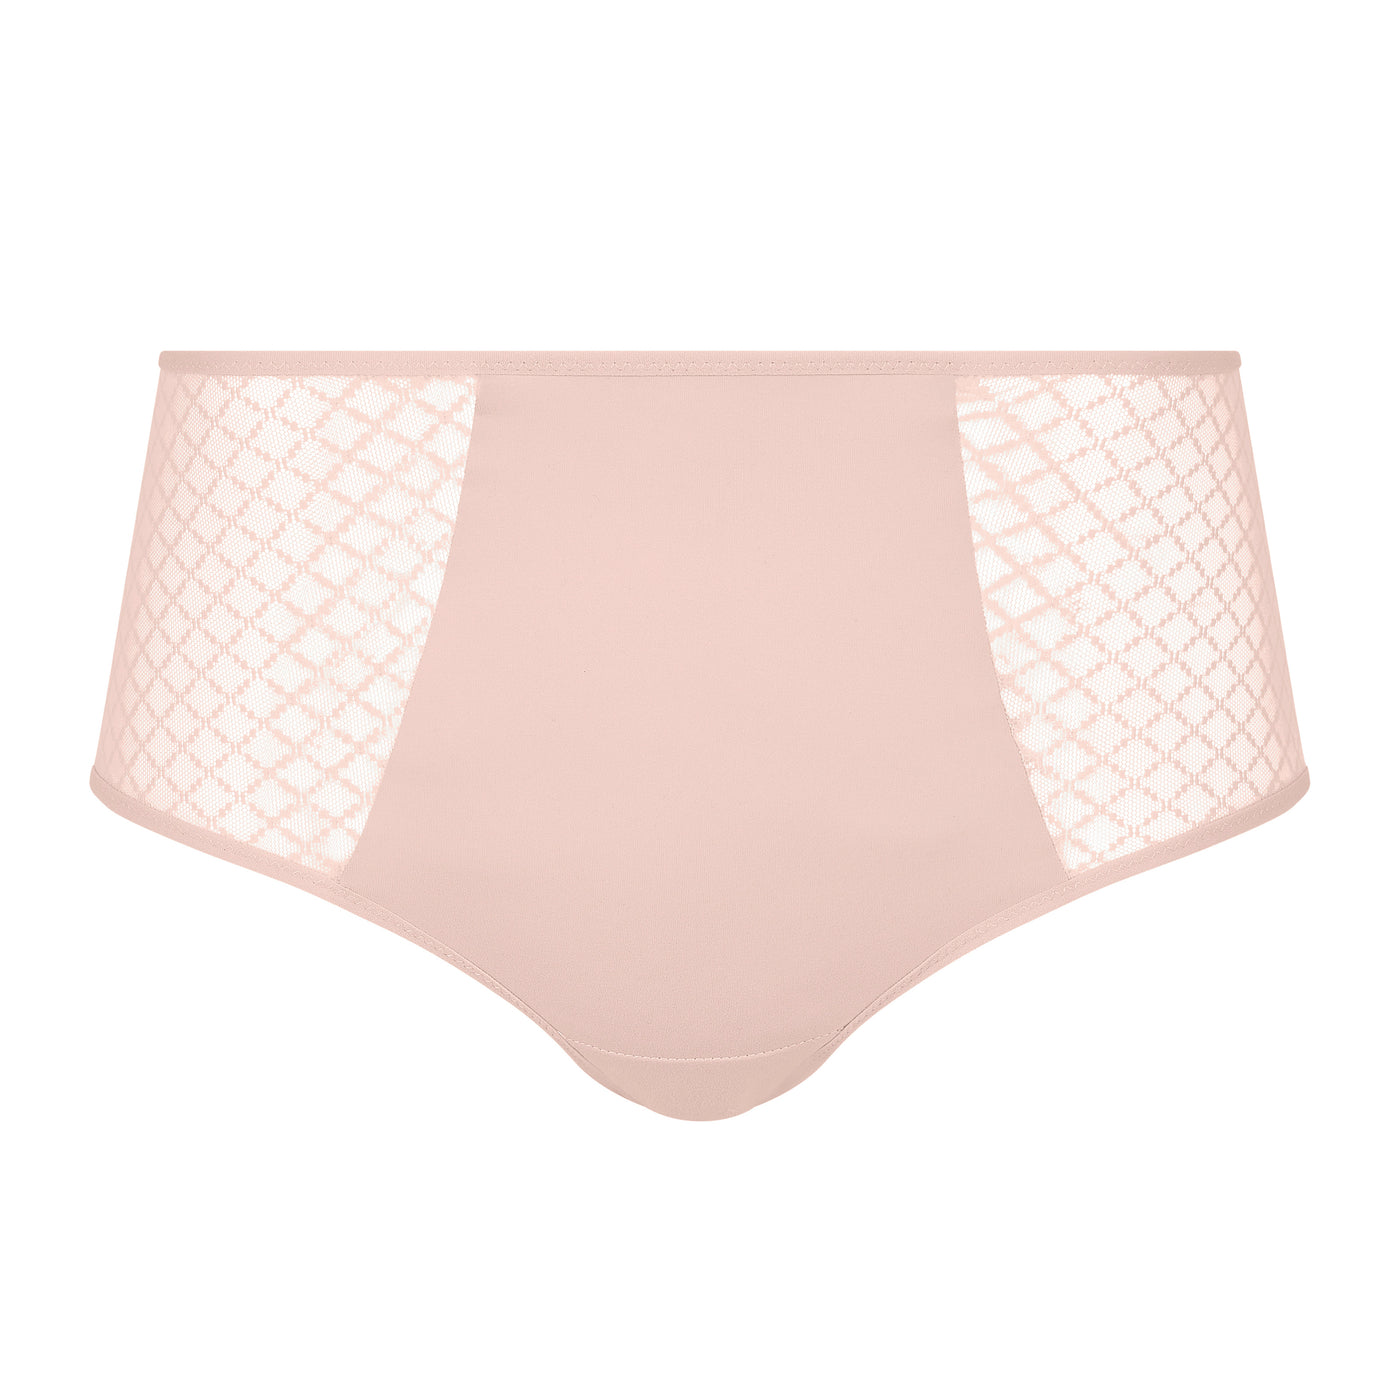 Chantelle Norah Chic High-waisted Full brief Dusky pink